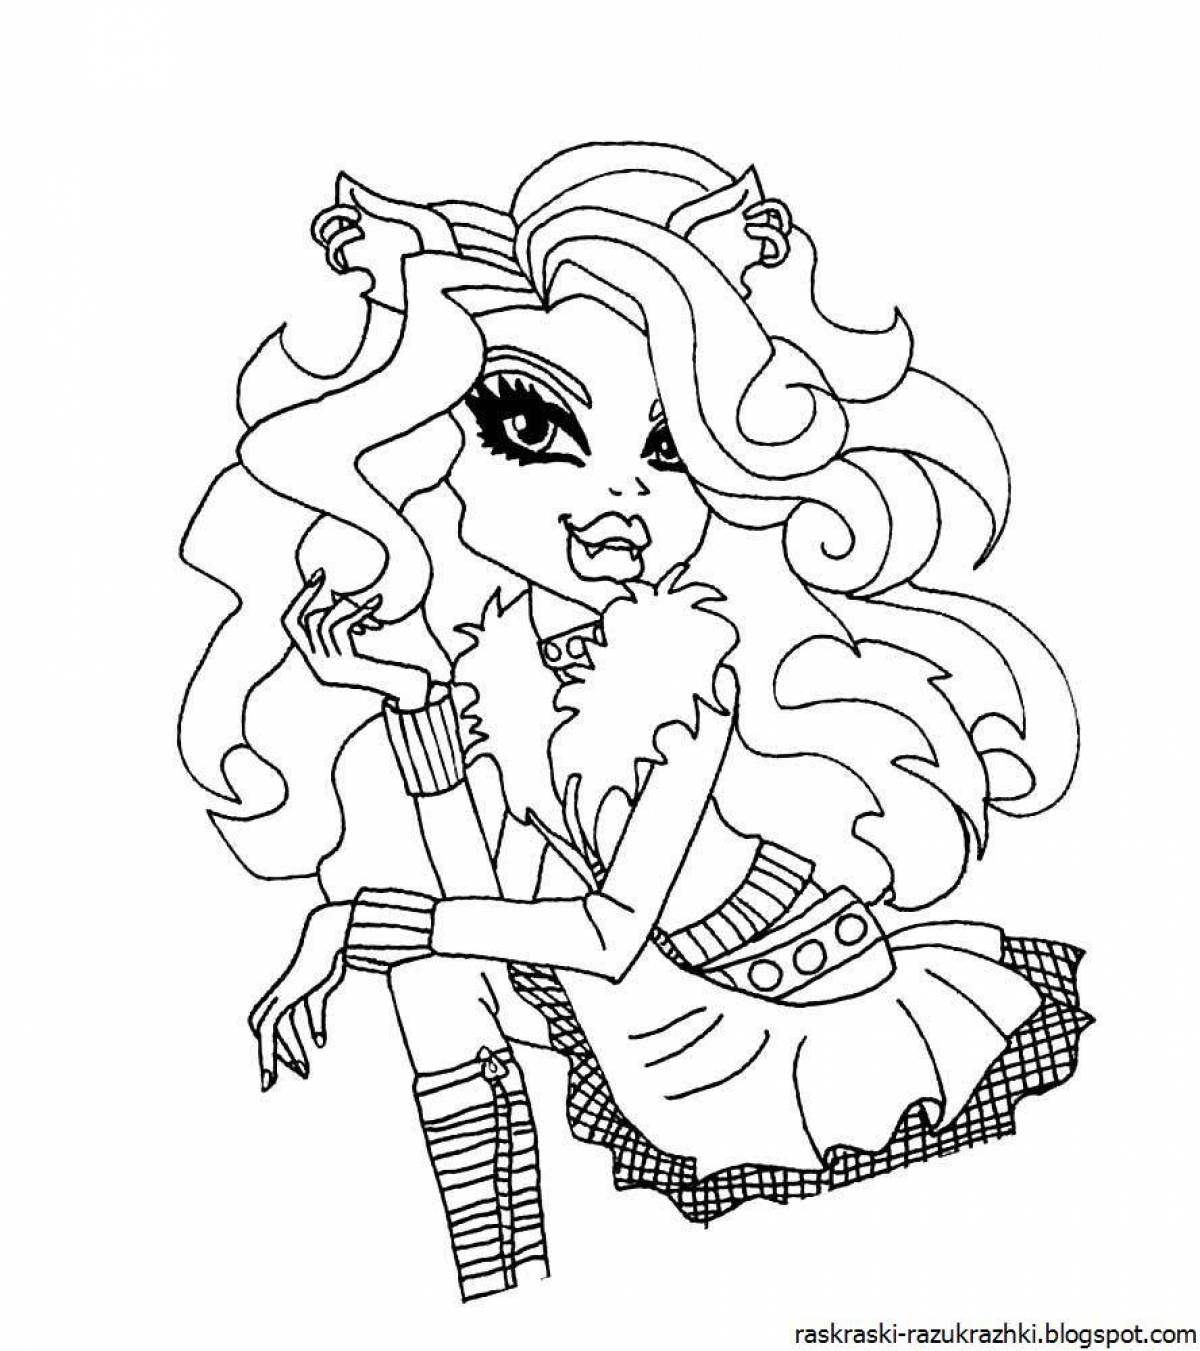 Splendid monster high coloring page